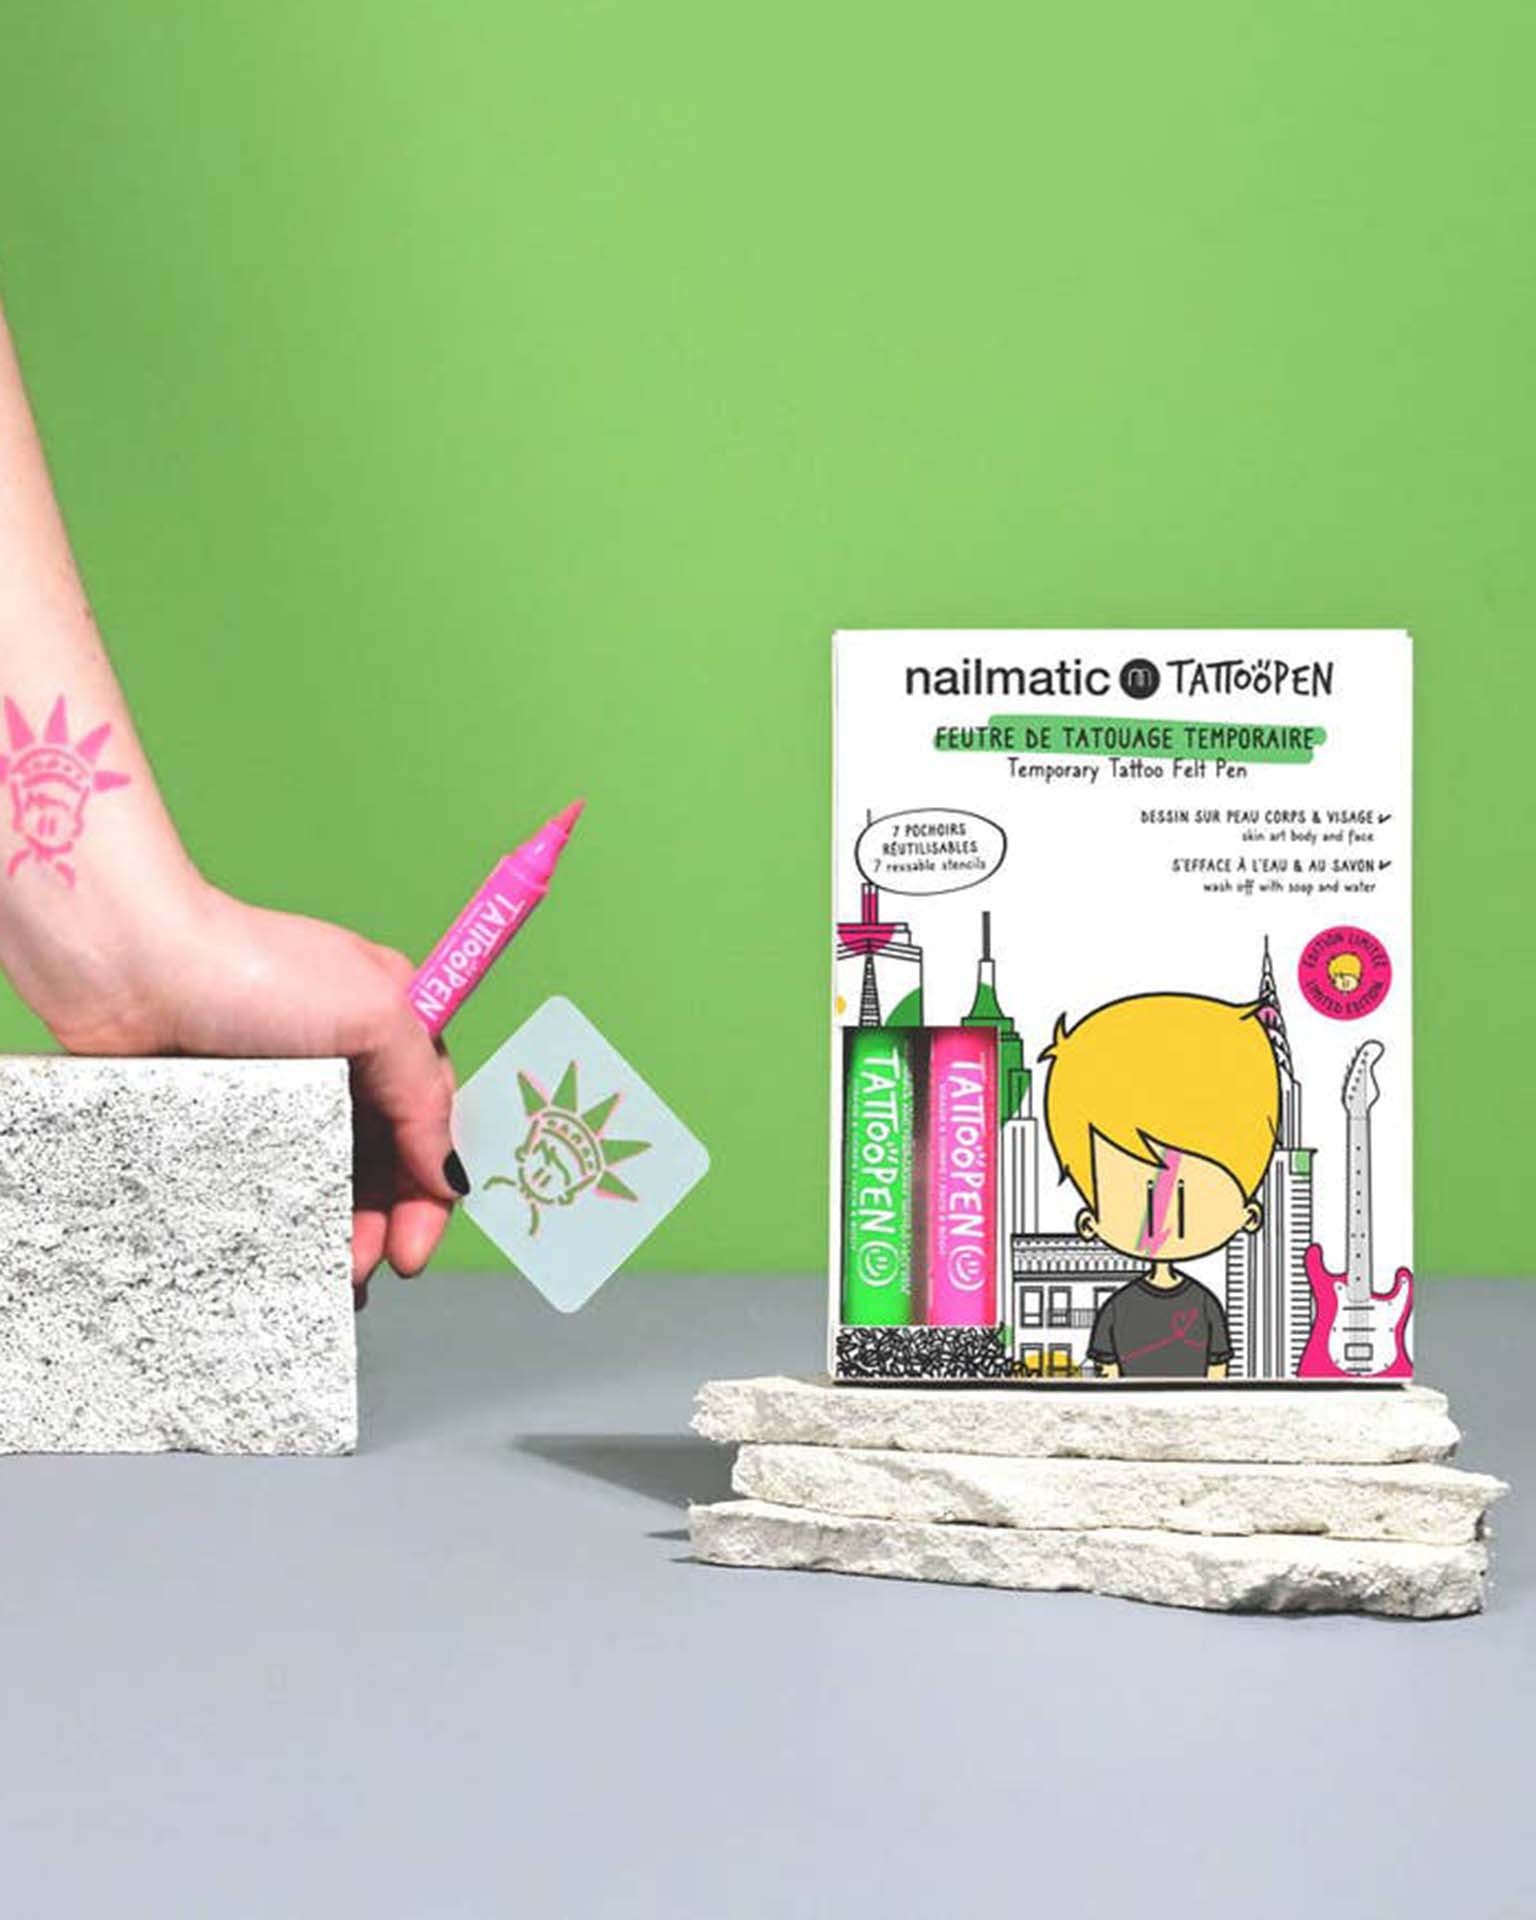 Little nailmatic play tattoopen set in NYC